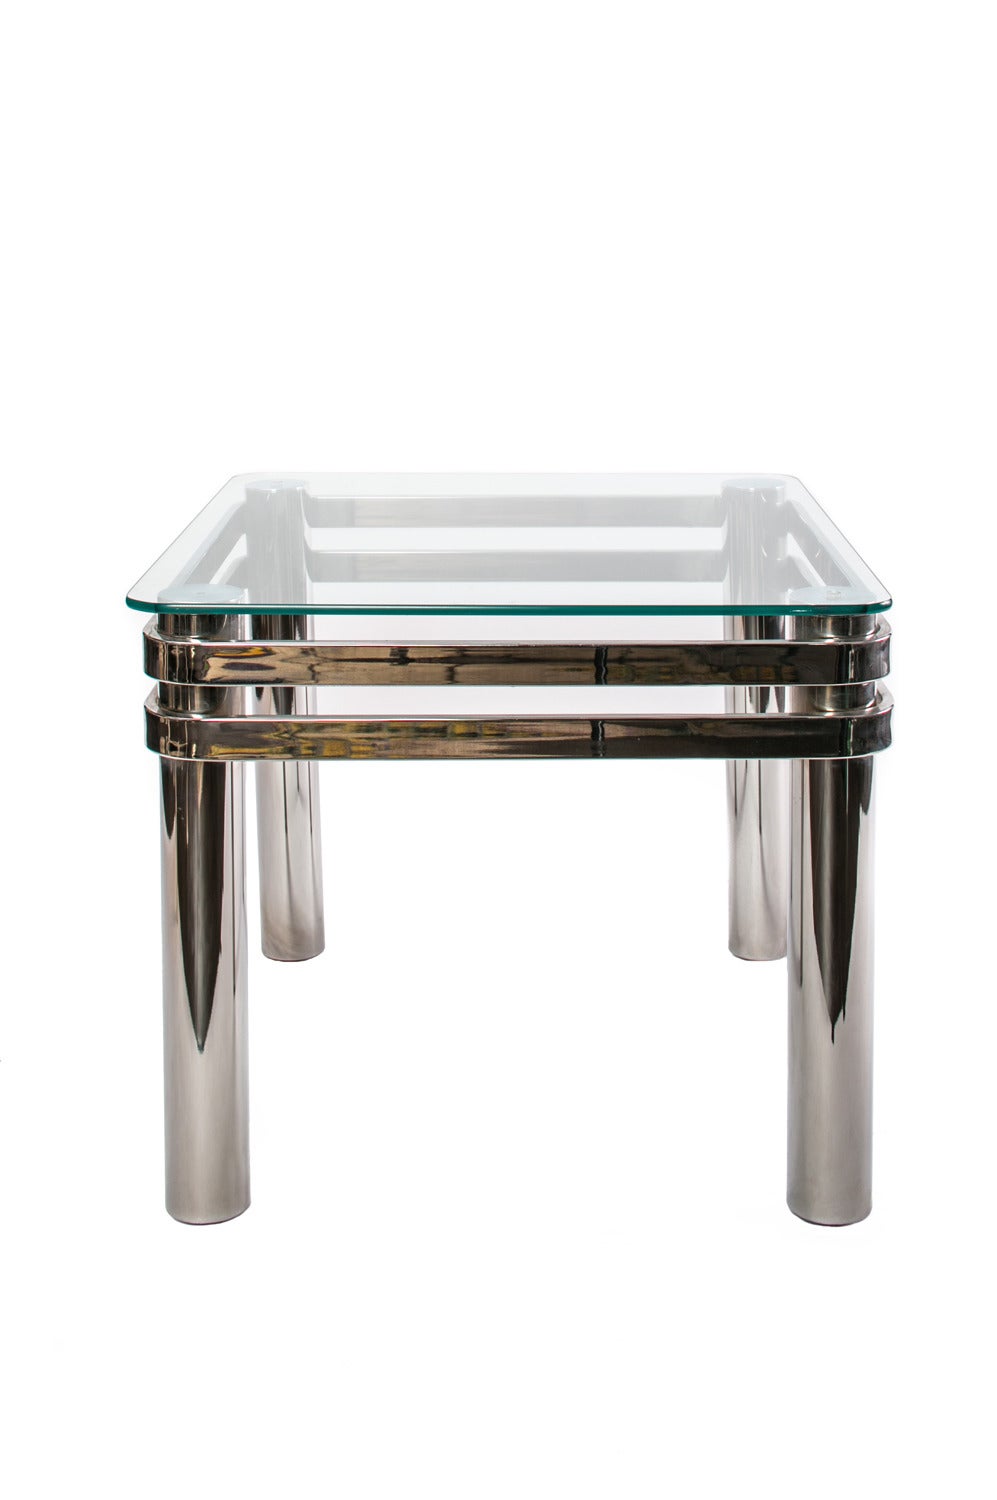 1970s chrome and glass side table with molded chrome wraparound accent. Tubular legs in Classic form of that era and creates a strong statement piece.